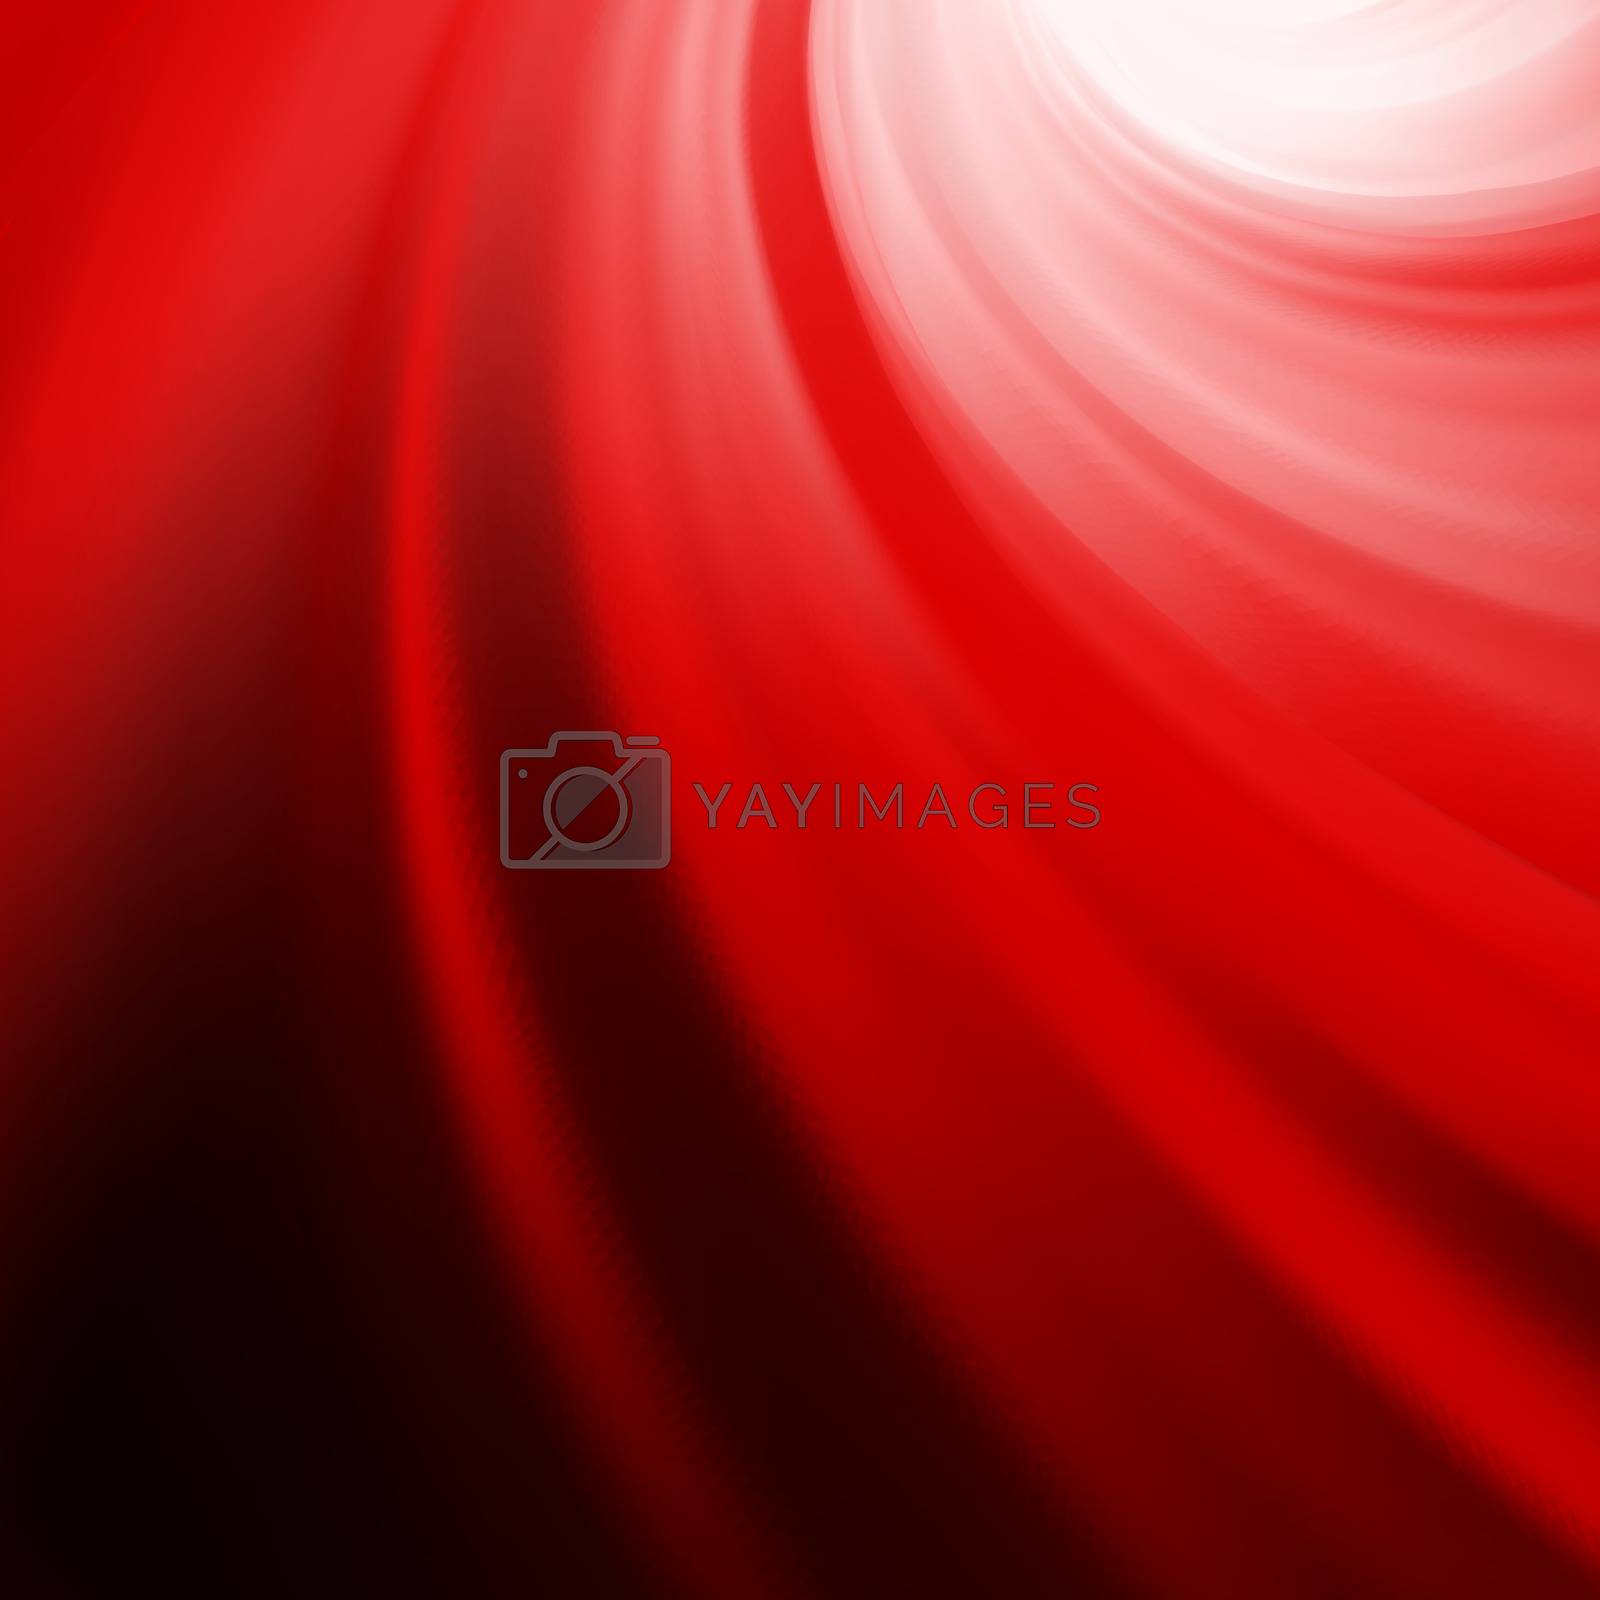 Royalty free image of Abstract ardent background. EPS 8 by Petrov_Vladimir